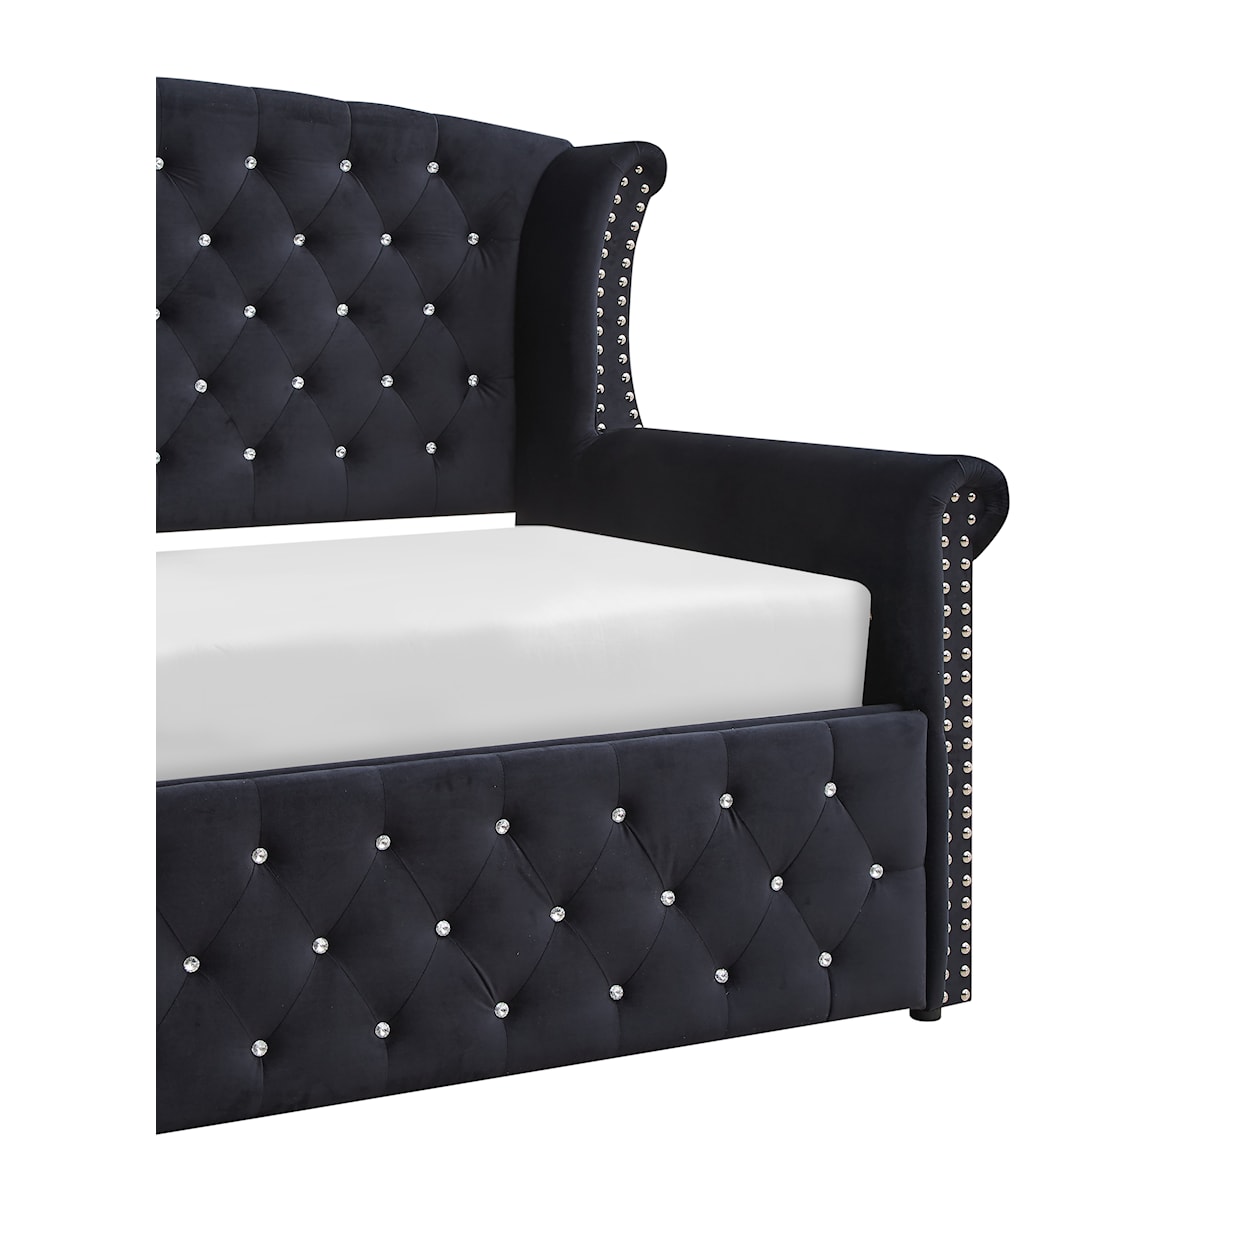 CM Lucinda Daybed